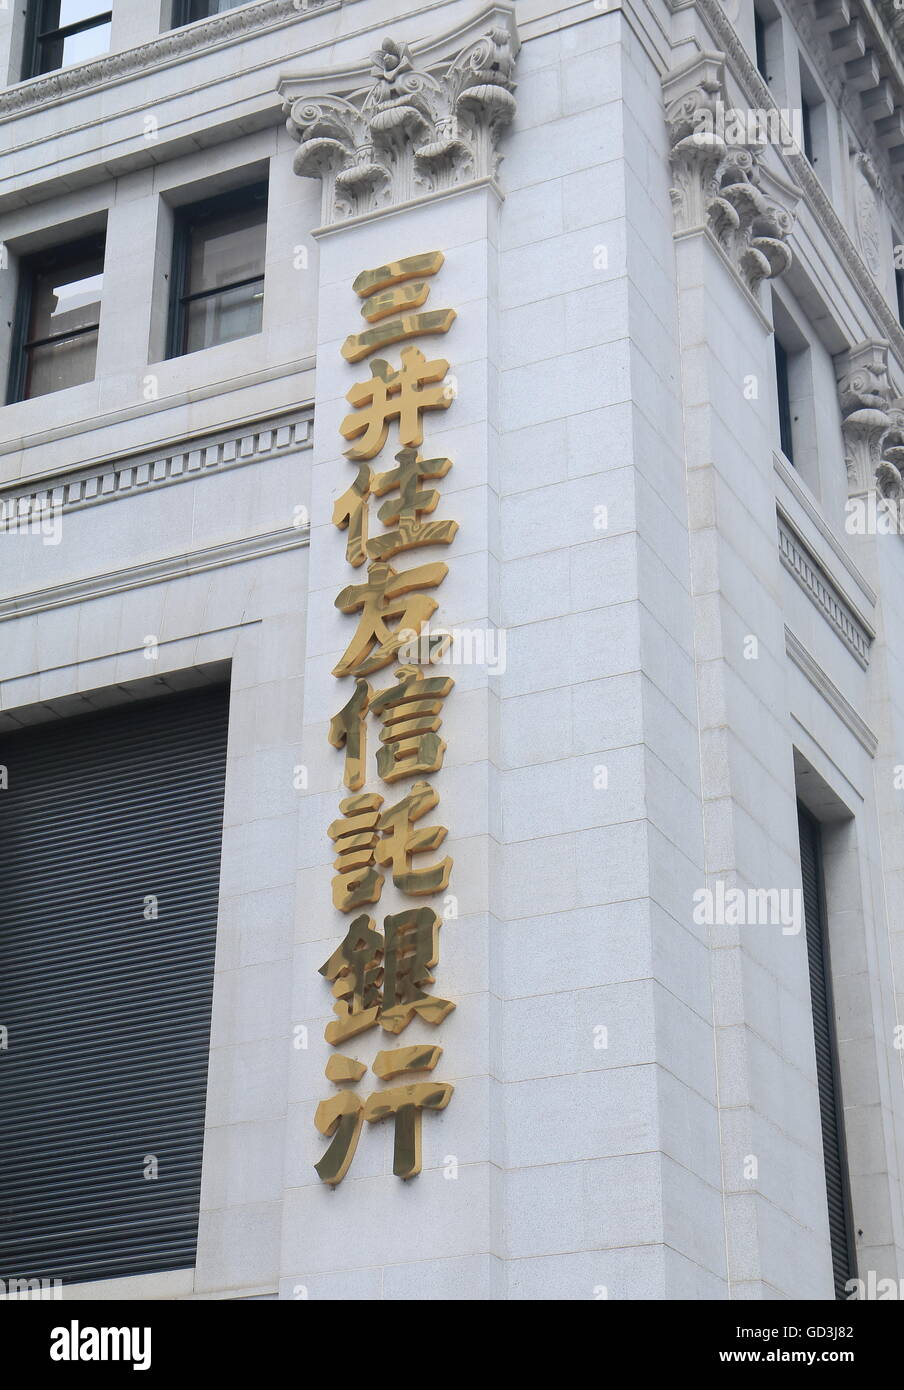 Mitsui Sumitomo bank.  Japanese bank based in Yurakucho Tokyo and is one of the biggest bank in Japan. Stock Photo